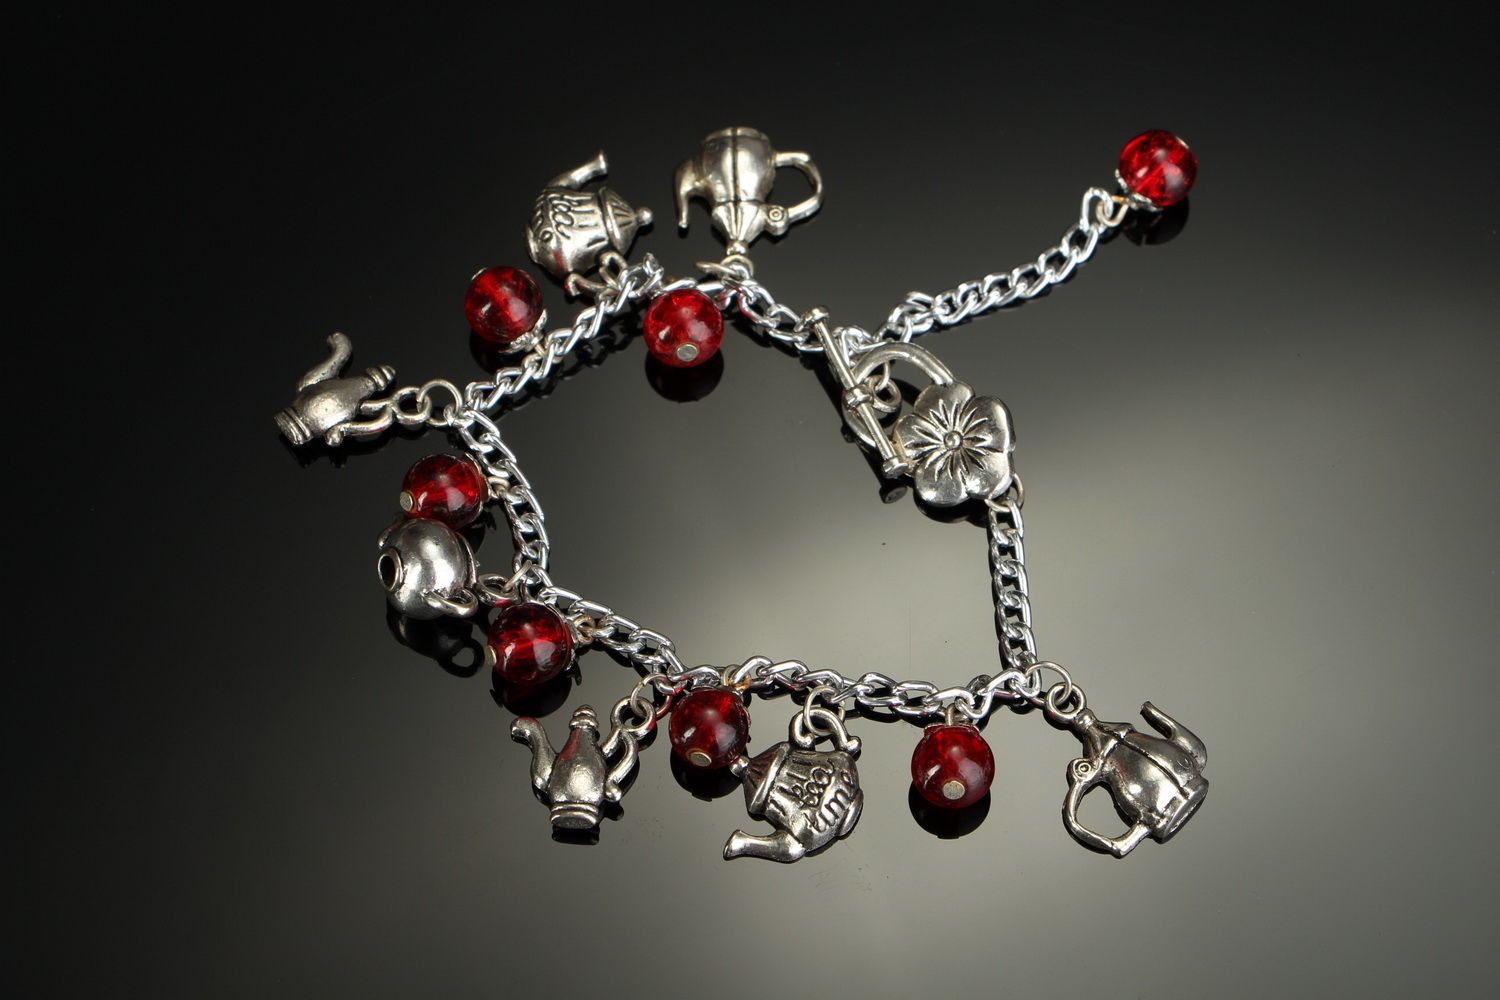 Bracelet made from steel and glass beads Tea pots photo 1